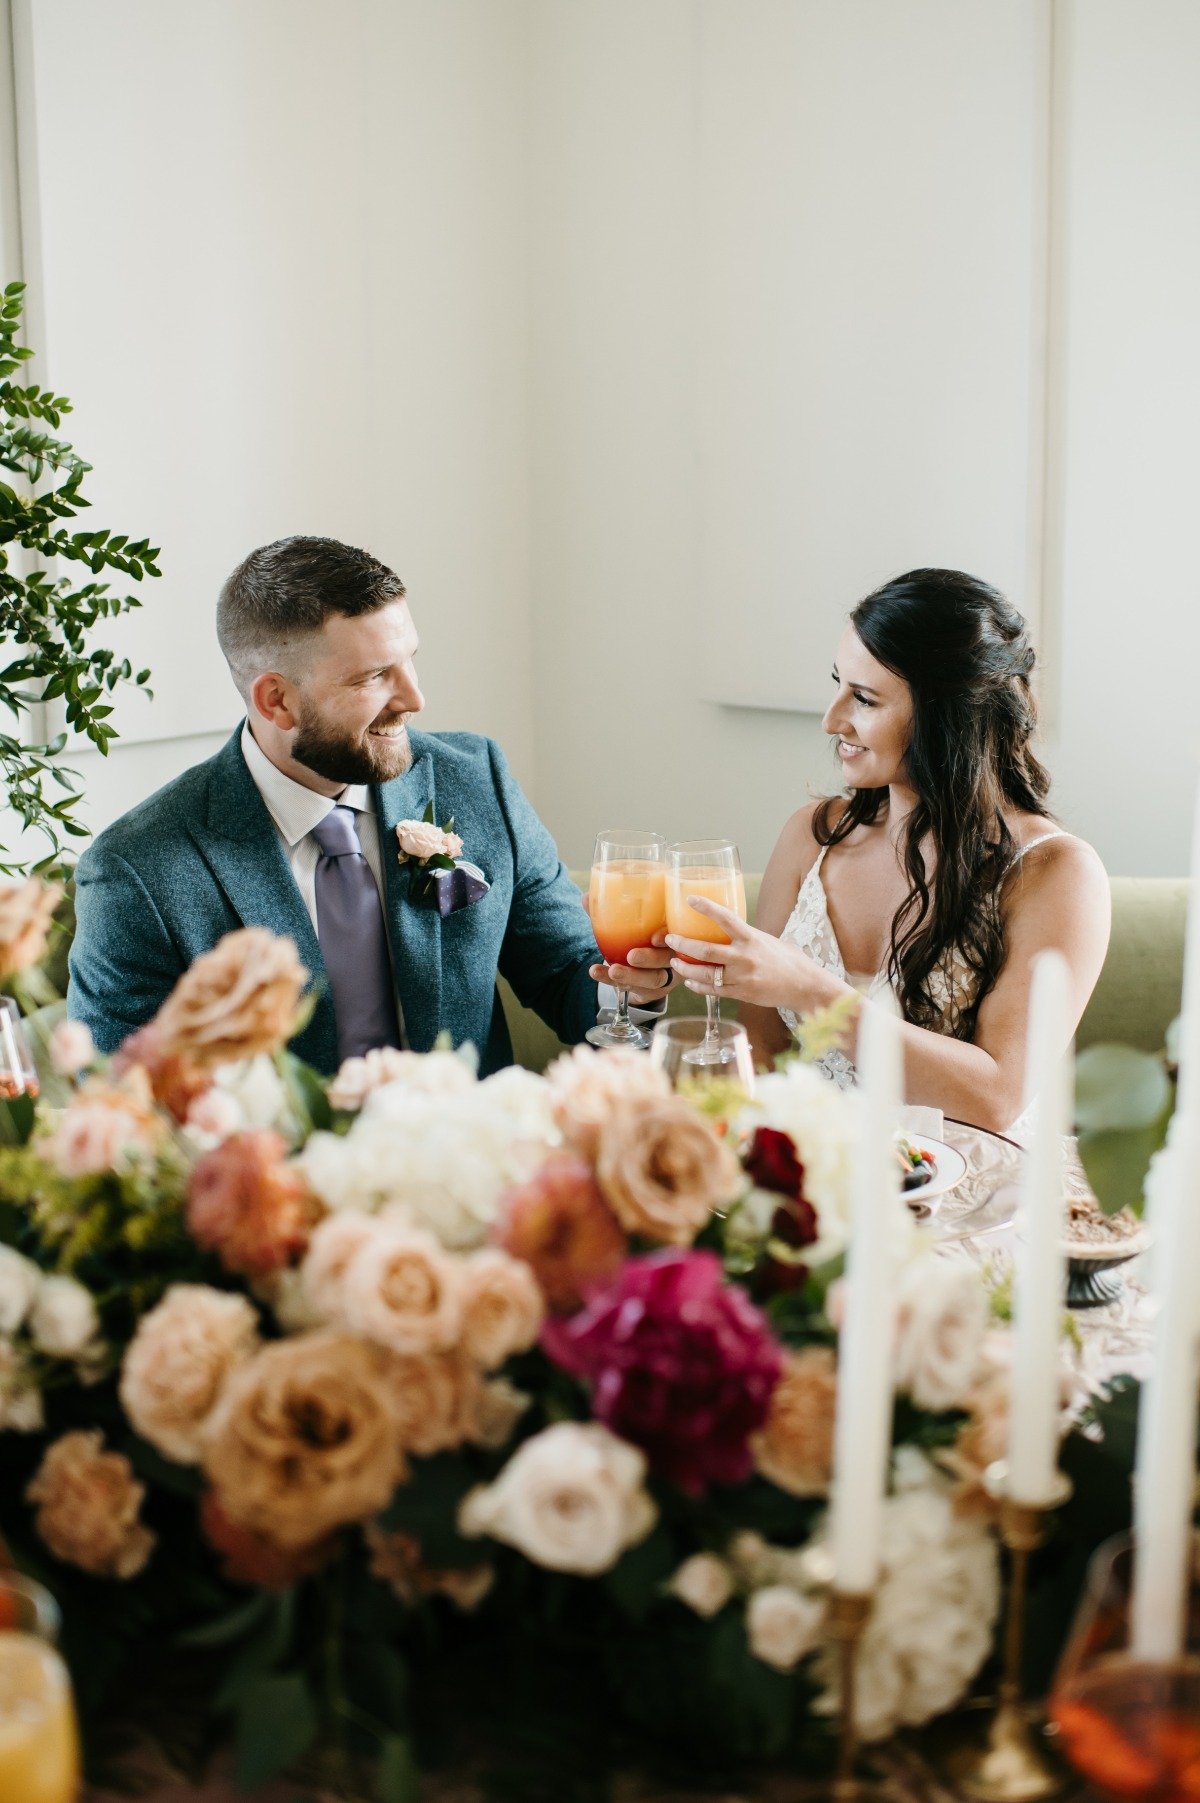 The 3 Key Pieces To A Successful Wedding Design